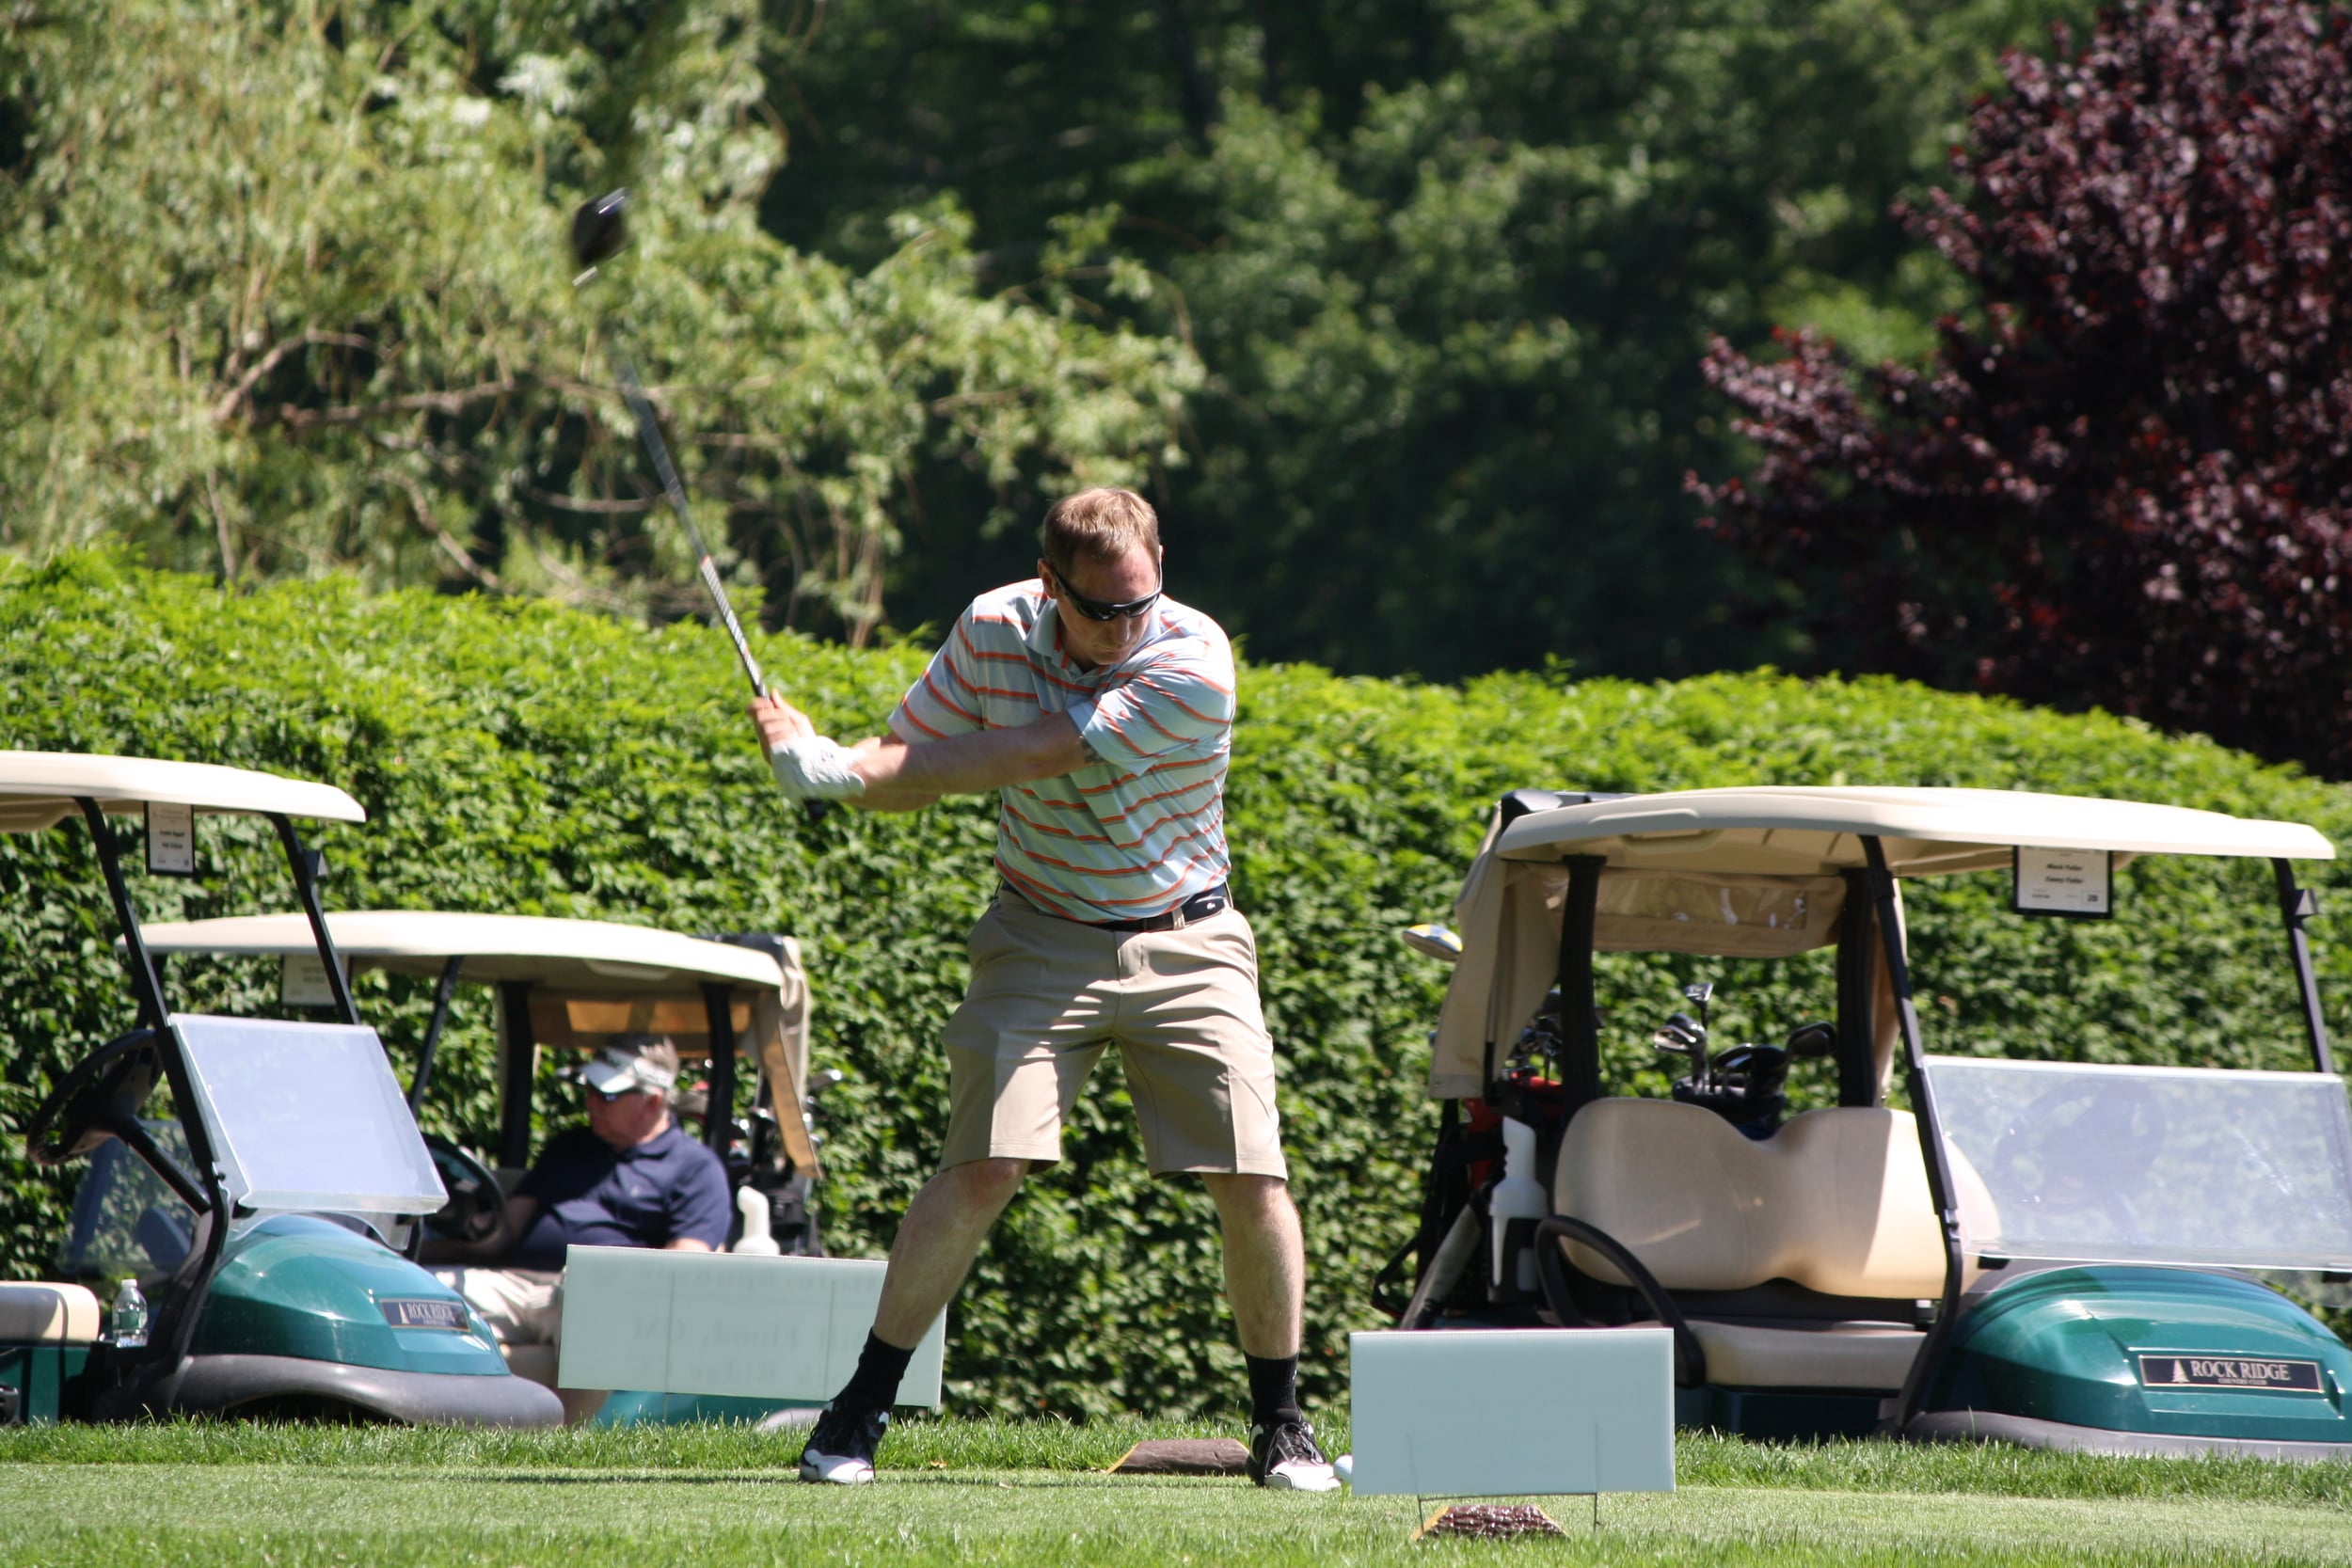 061614 rrcc golf Andy Ouillette 5389.JPG